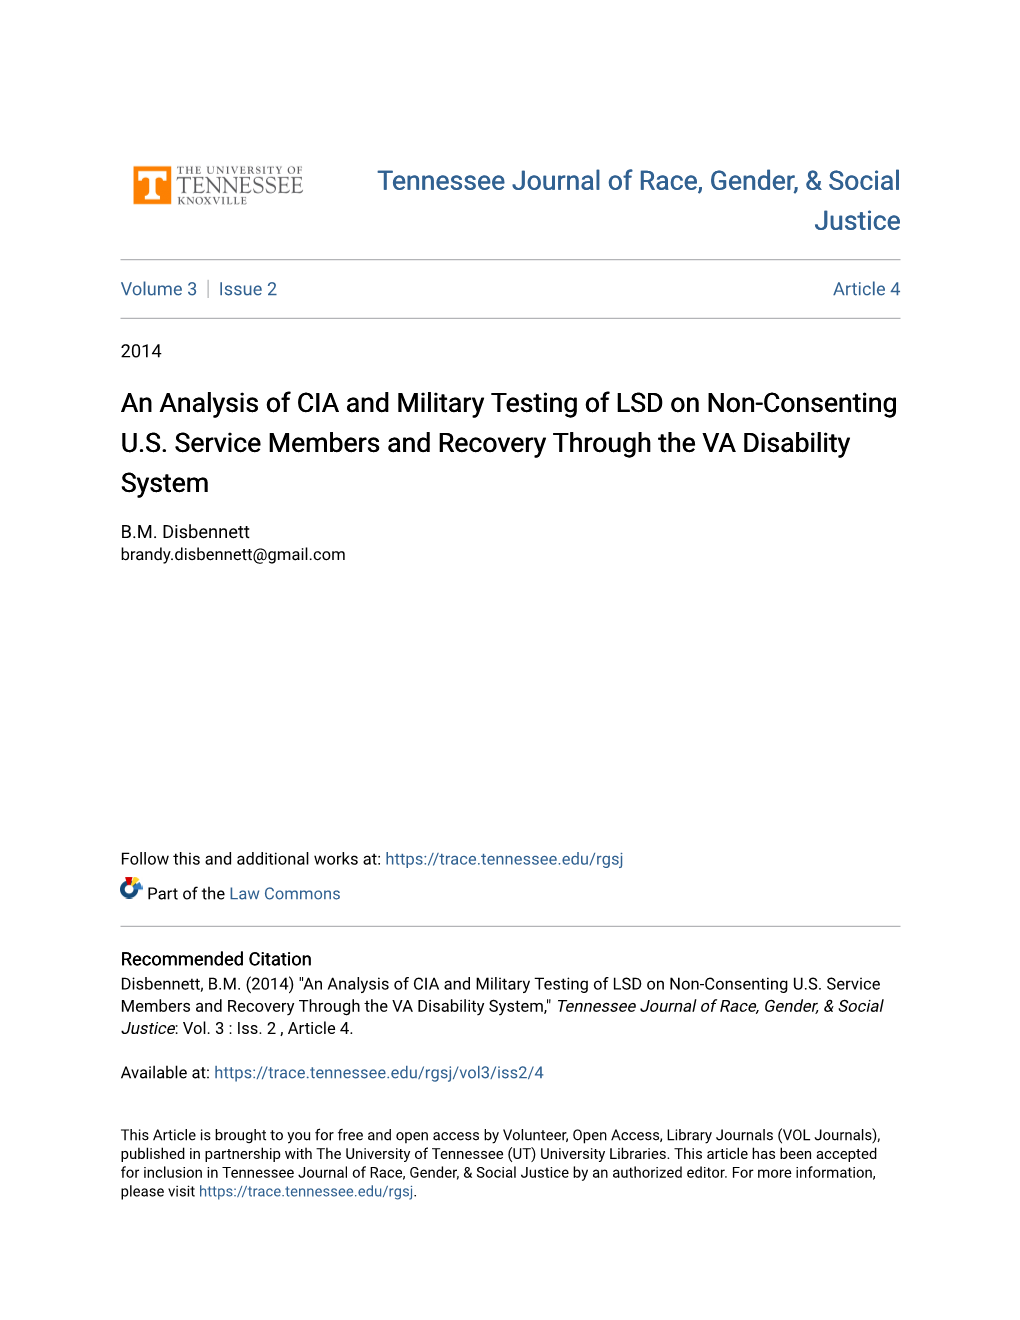 An Analysis of CIA and Military Testing of LSD on Non-Consenting U.S. Service Members and Recovery Through the VA Disability System